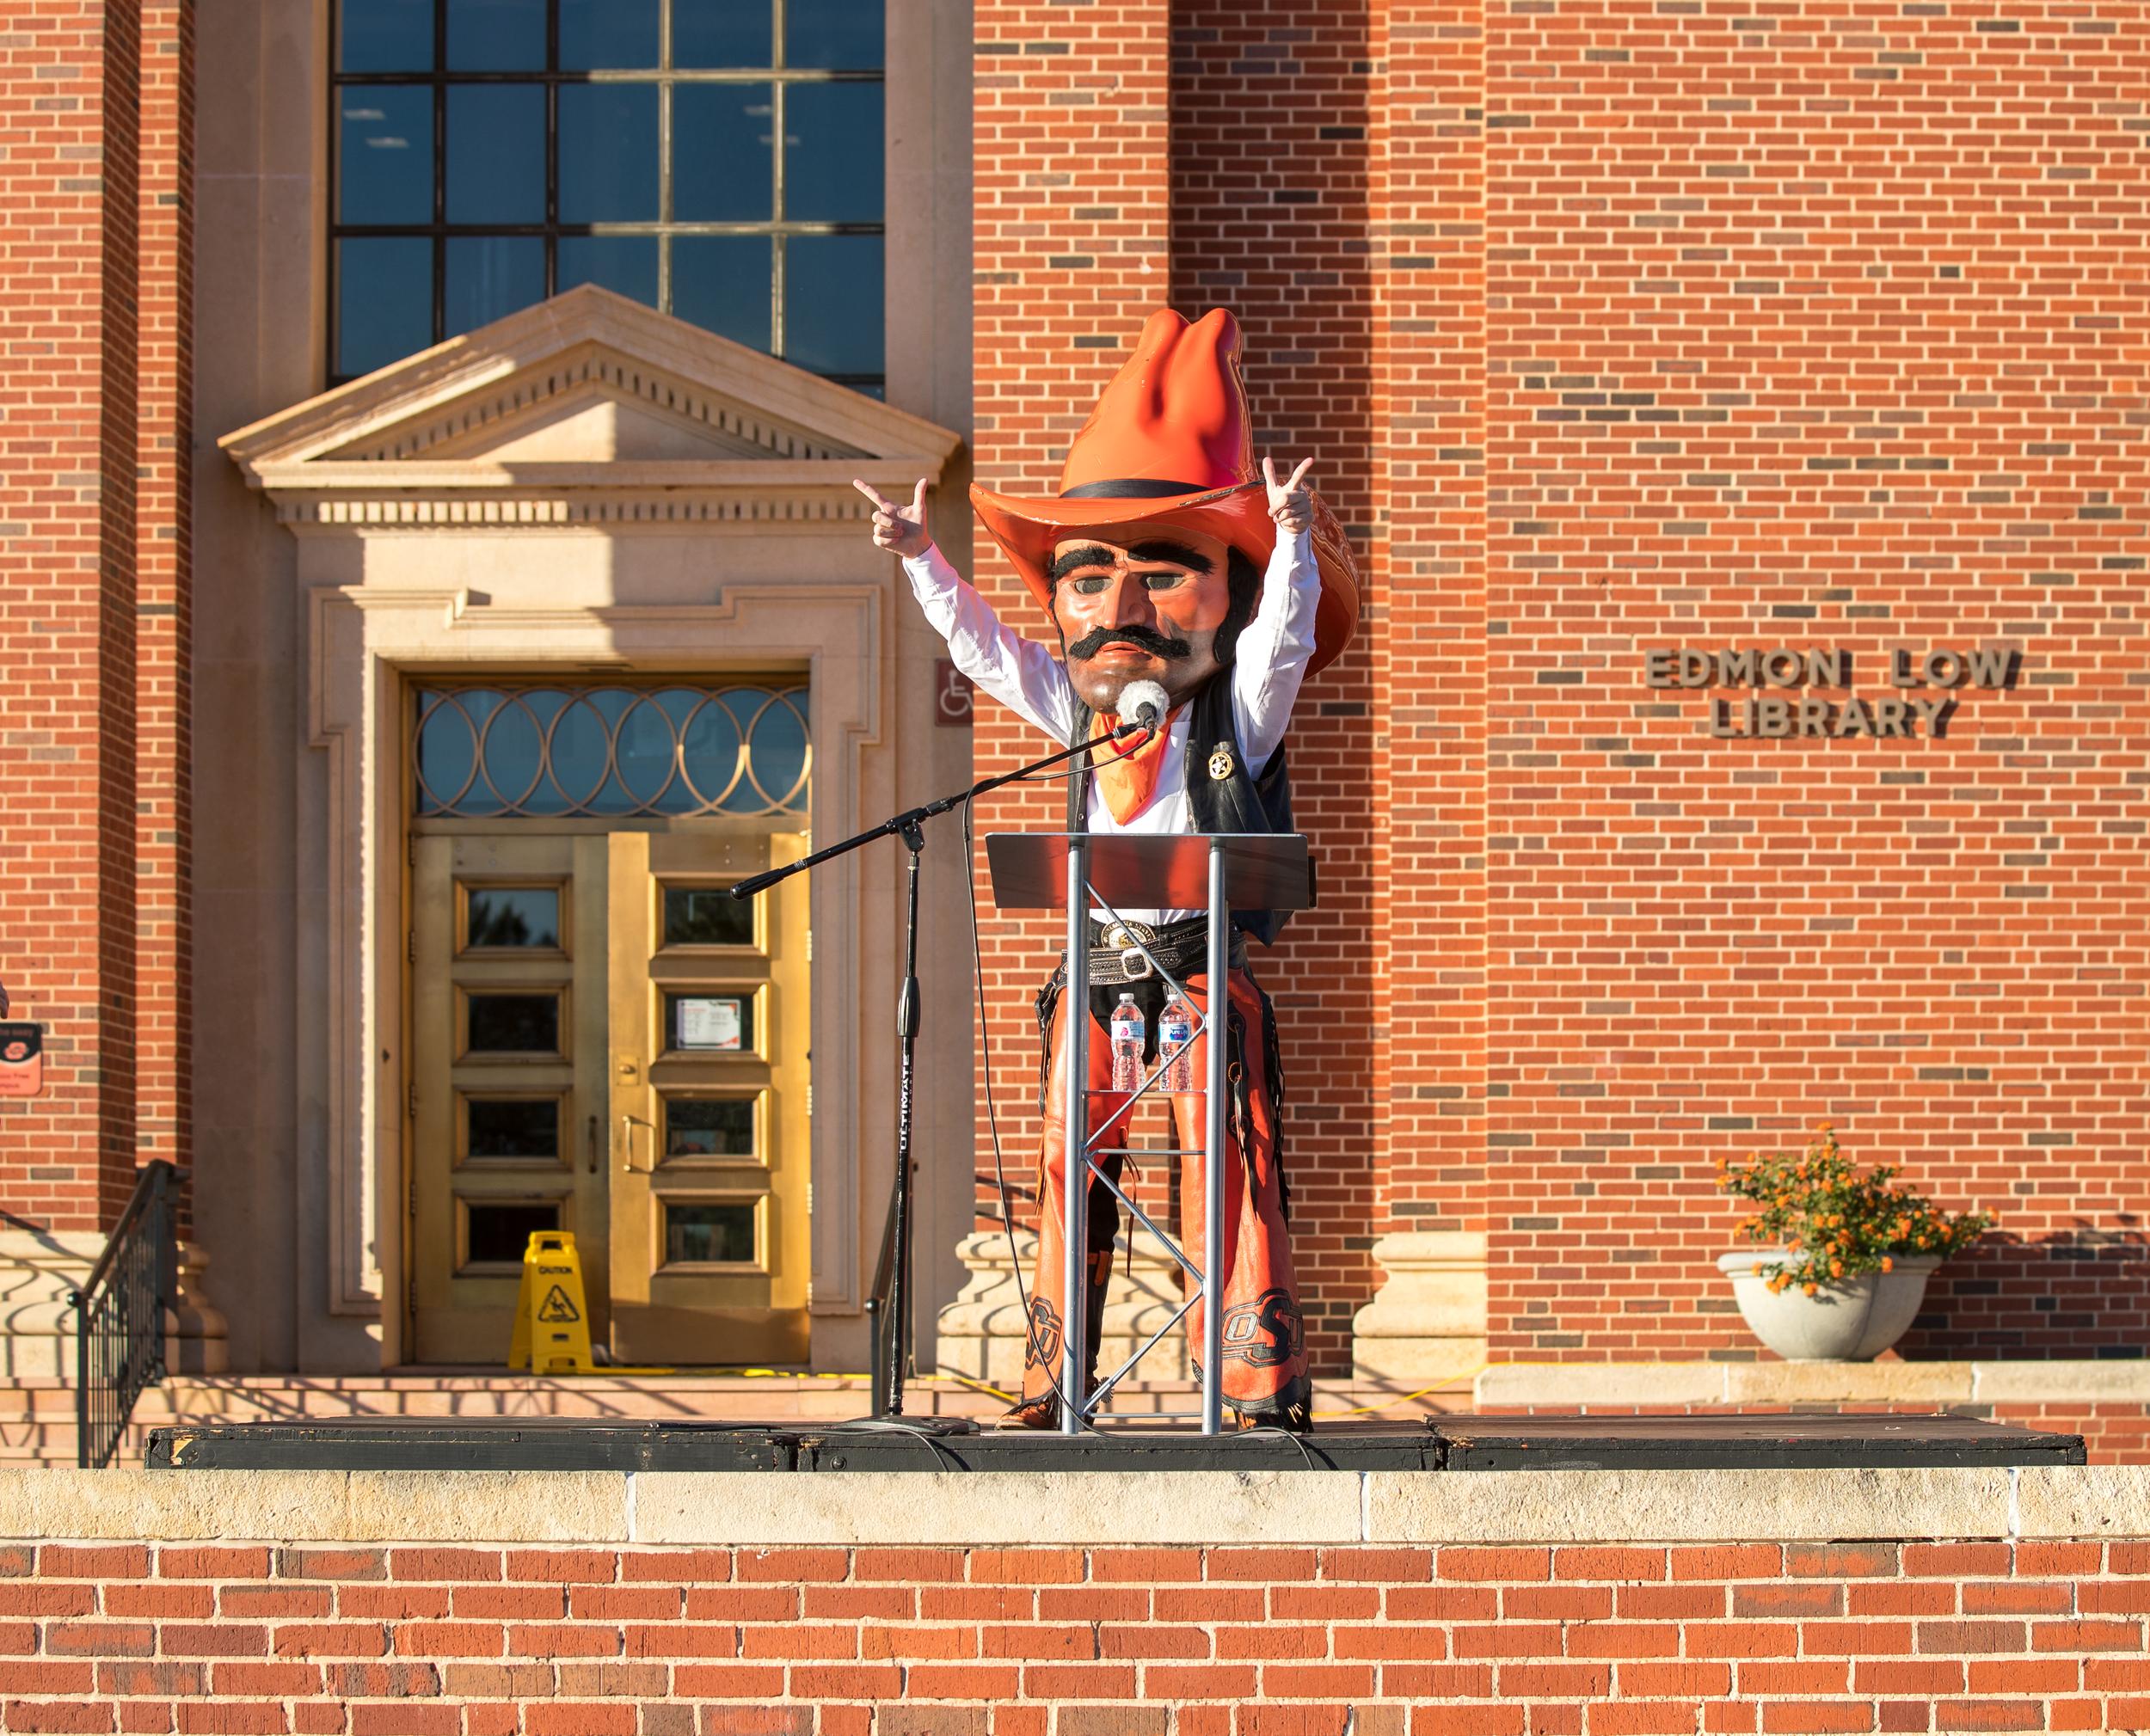 Pistol Pete stands at a lectern with a micophone in front of Edmon Low Library while proudly showing "Go Pokes" with both hands.